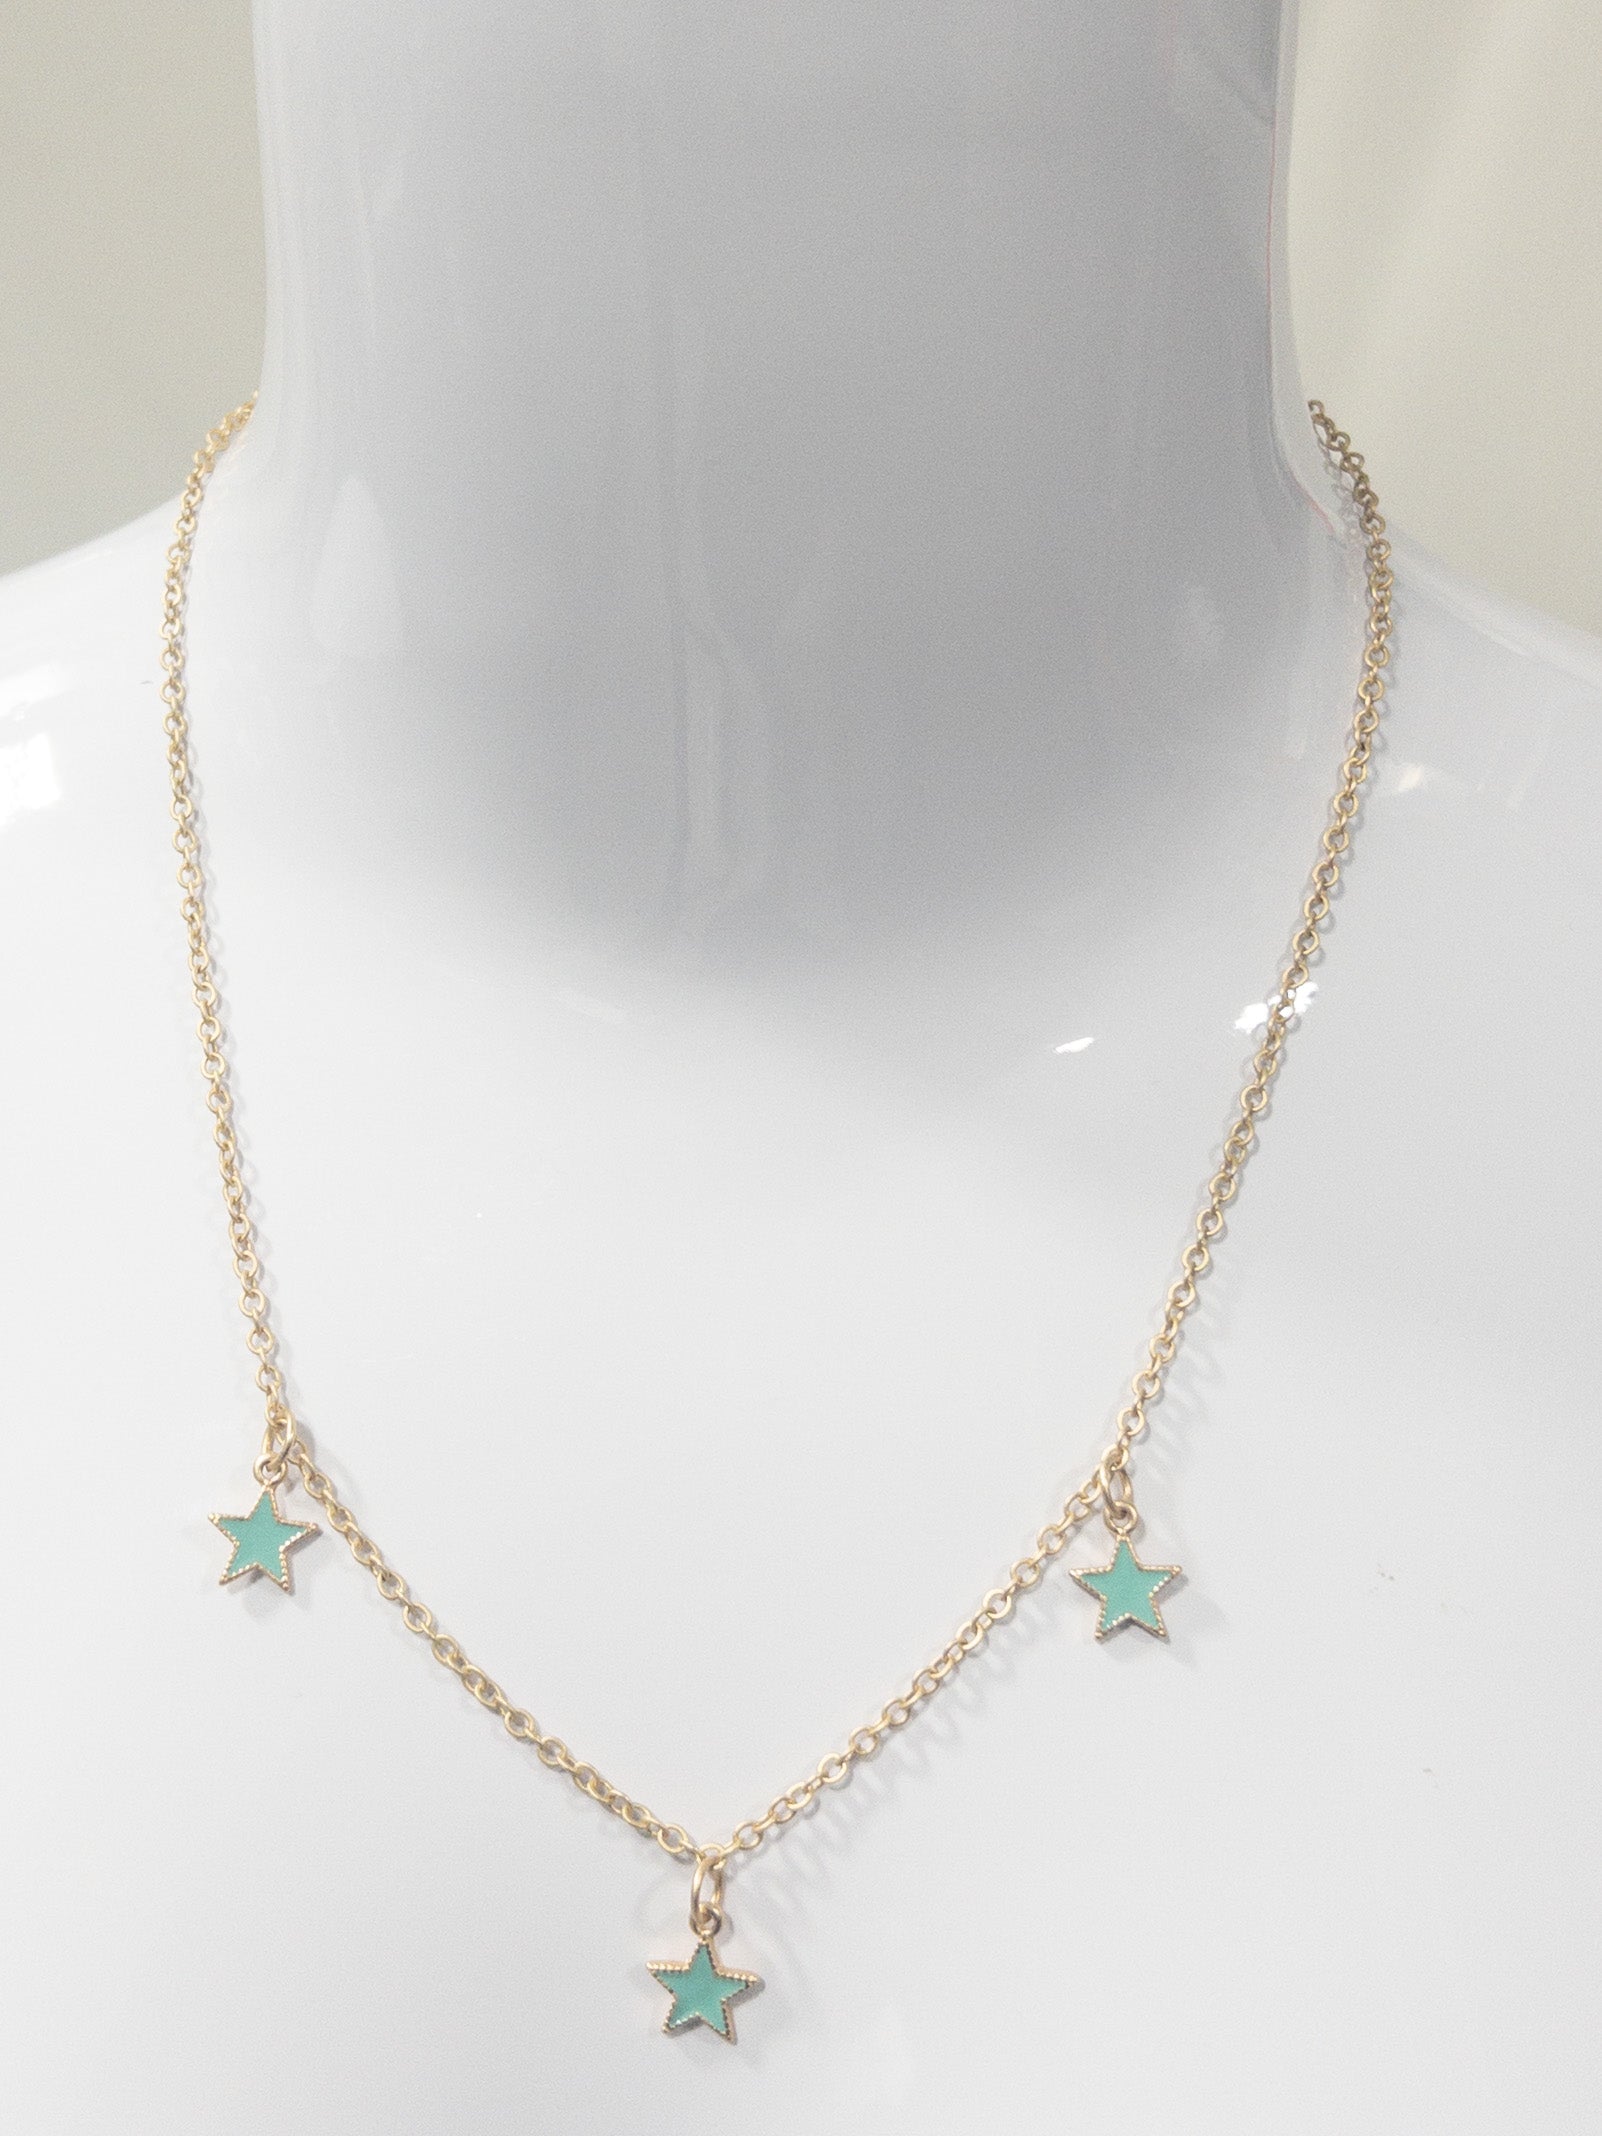 JANE MARIE TRIPLE TEAL STAR NECKLACE